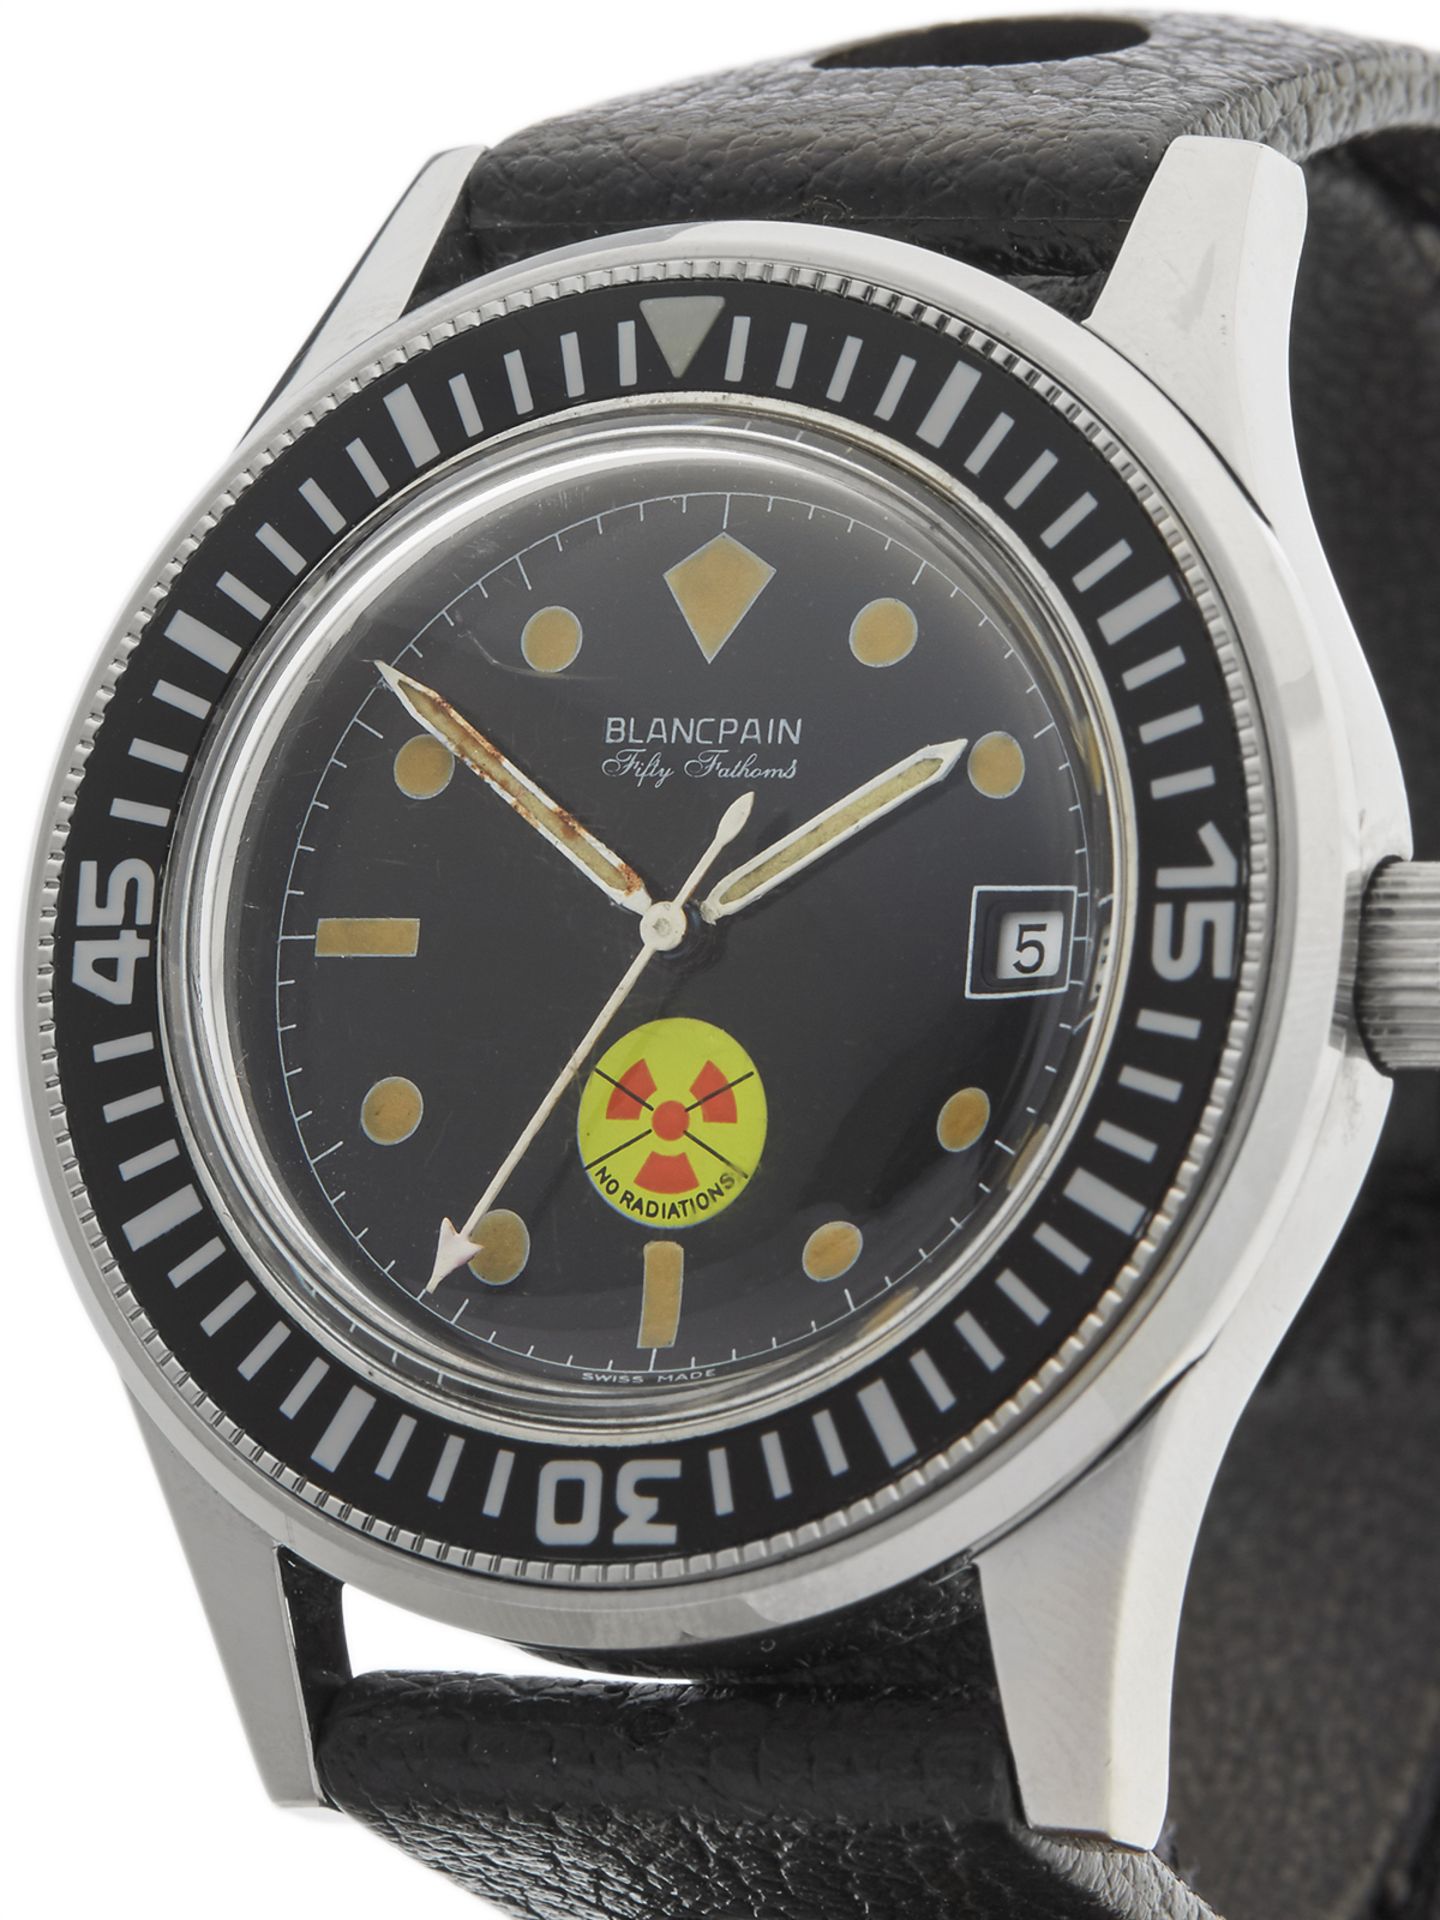 Blancpain Fifty Fathoms No Radiation 36mm Stainless Steel 206226 - Image 3 of 8